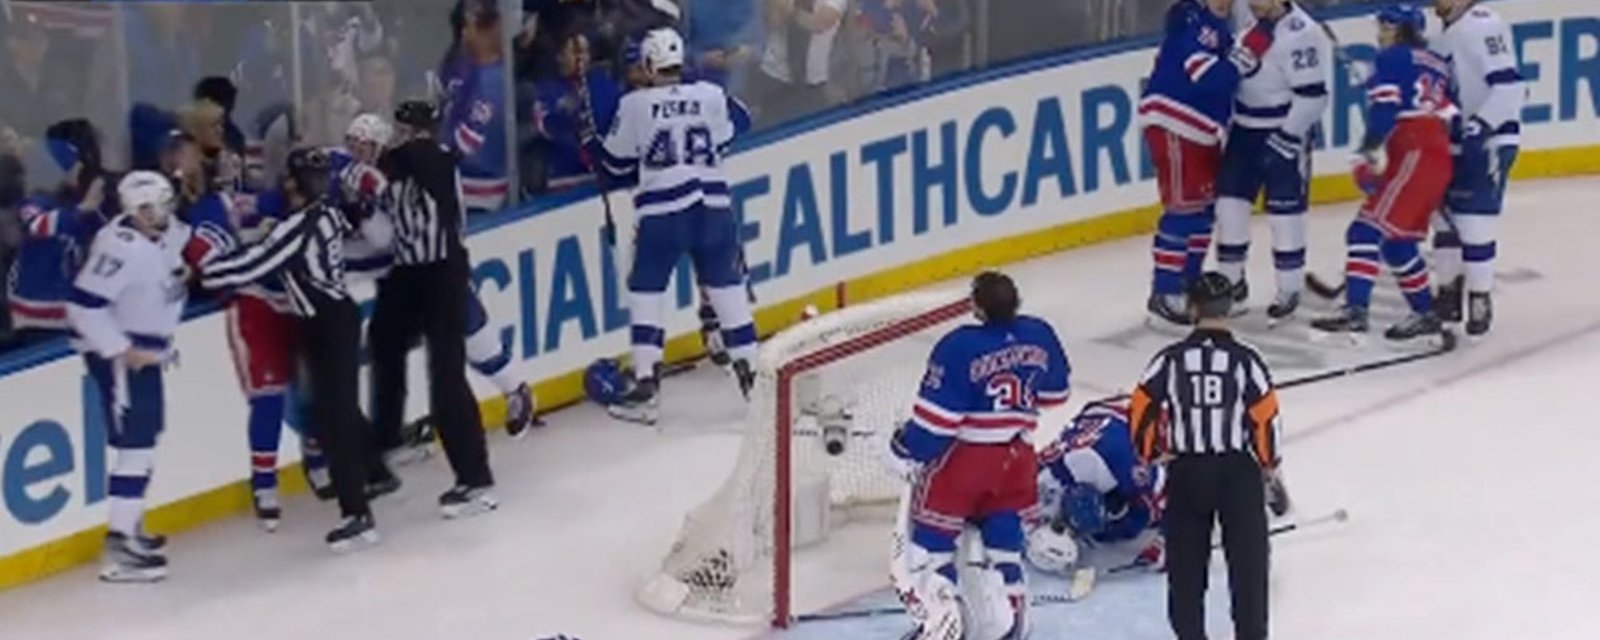 Multiple fines handed out by NHL after melee between Rangers and Lightning last night